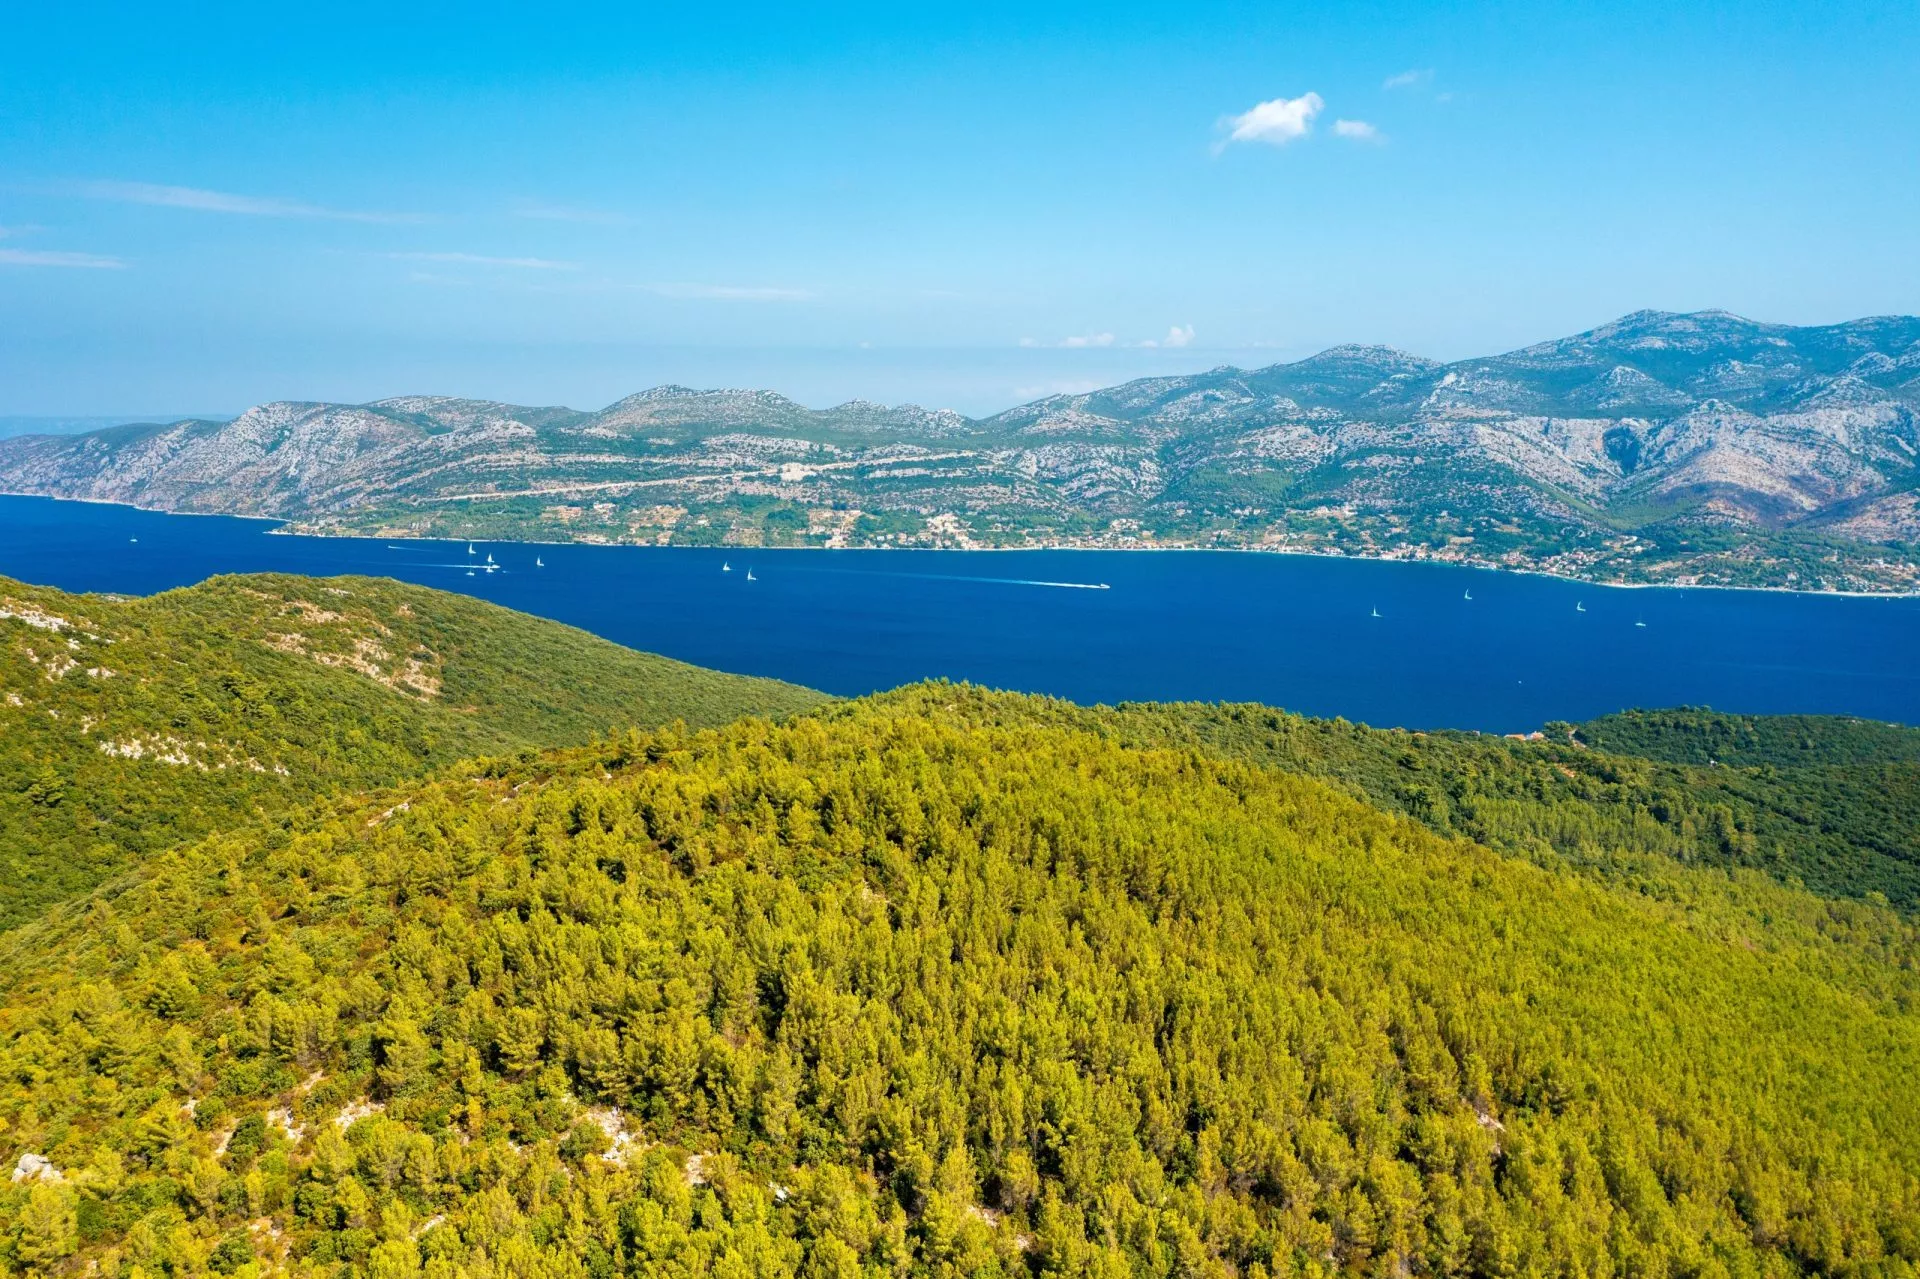 Pine forests of korcula